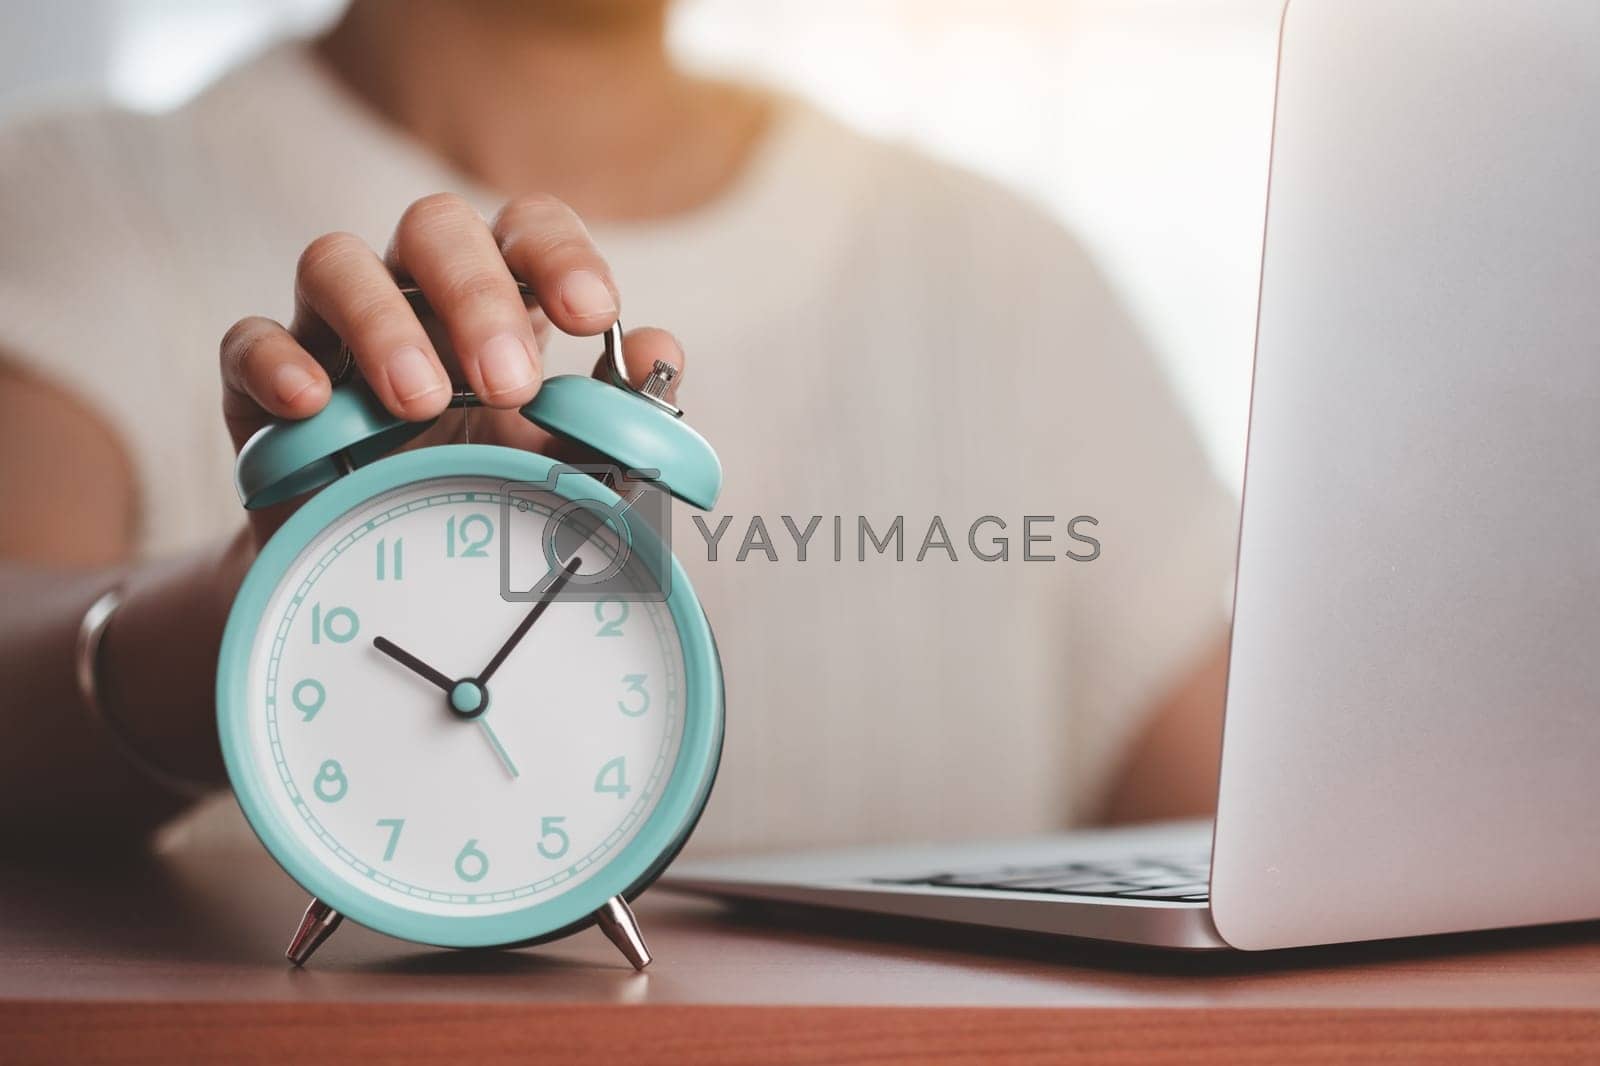 Royalty free image of Asian woman's hand reaching for an alarm clock to check the time on desk with a computer laptop by iamnoonmai